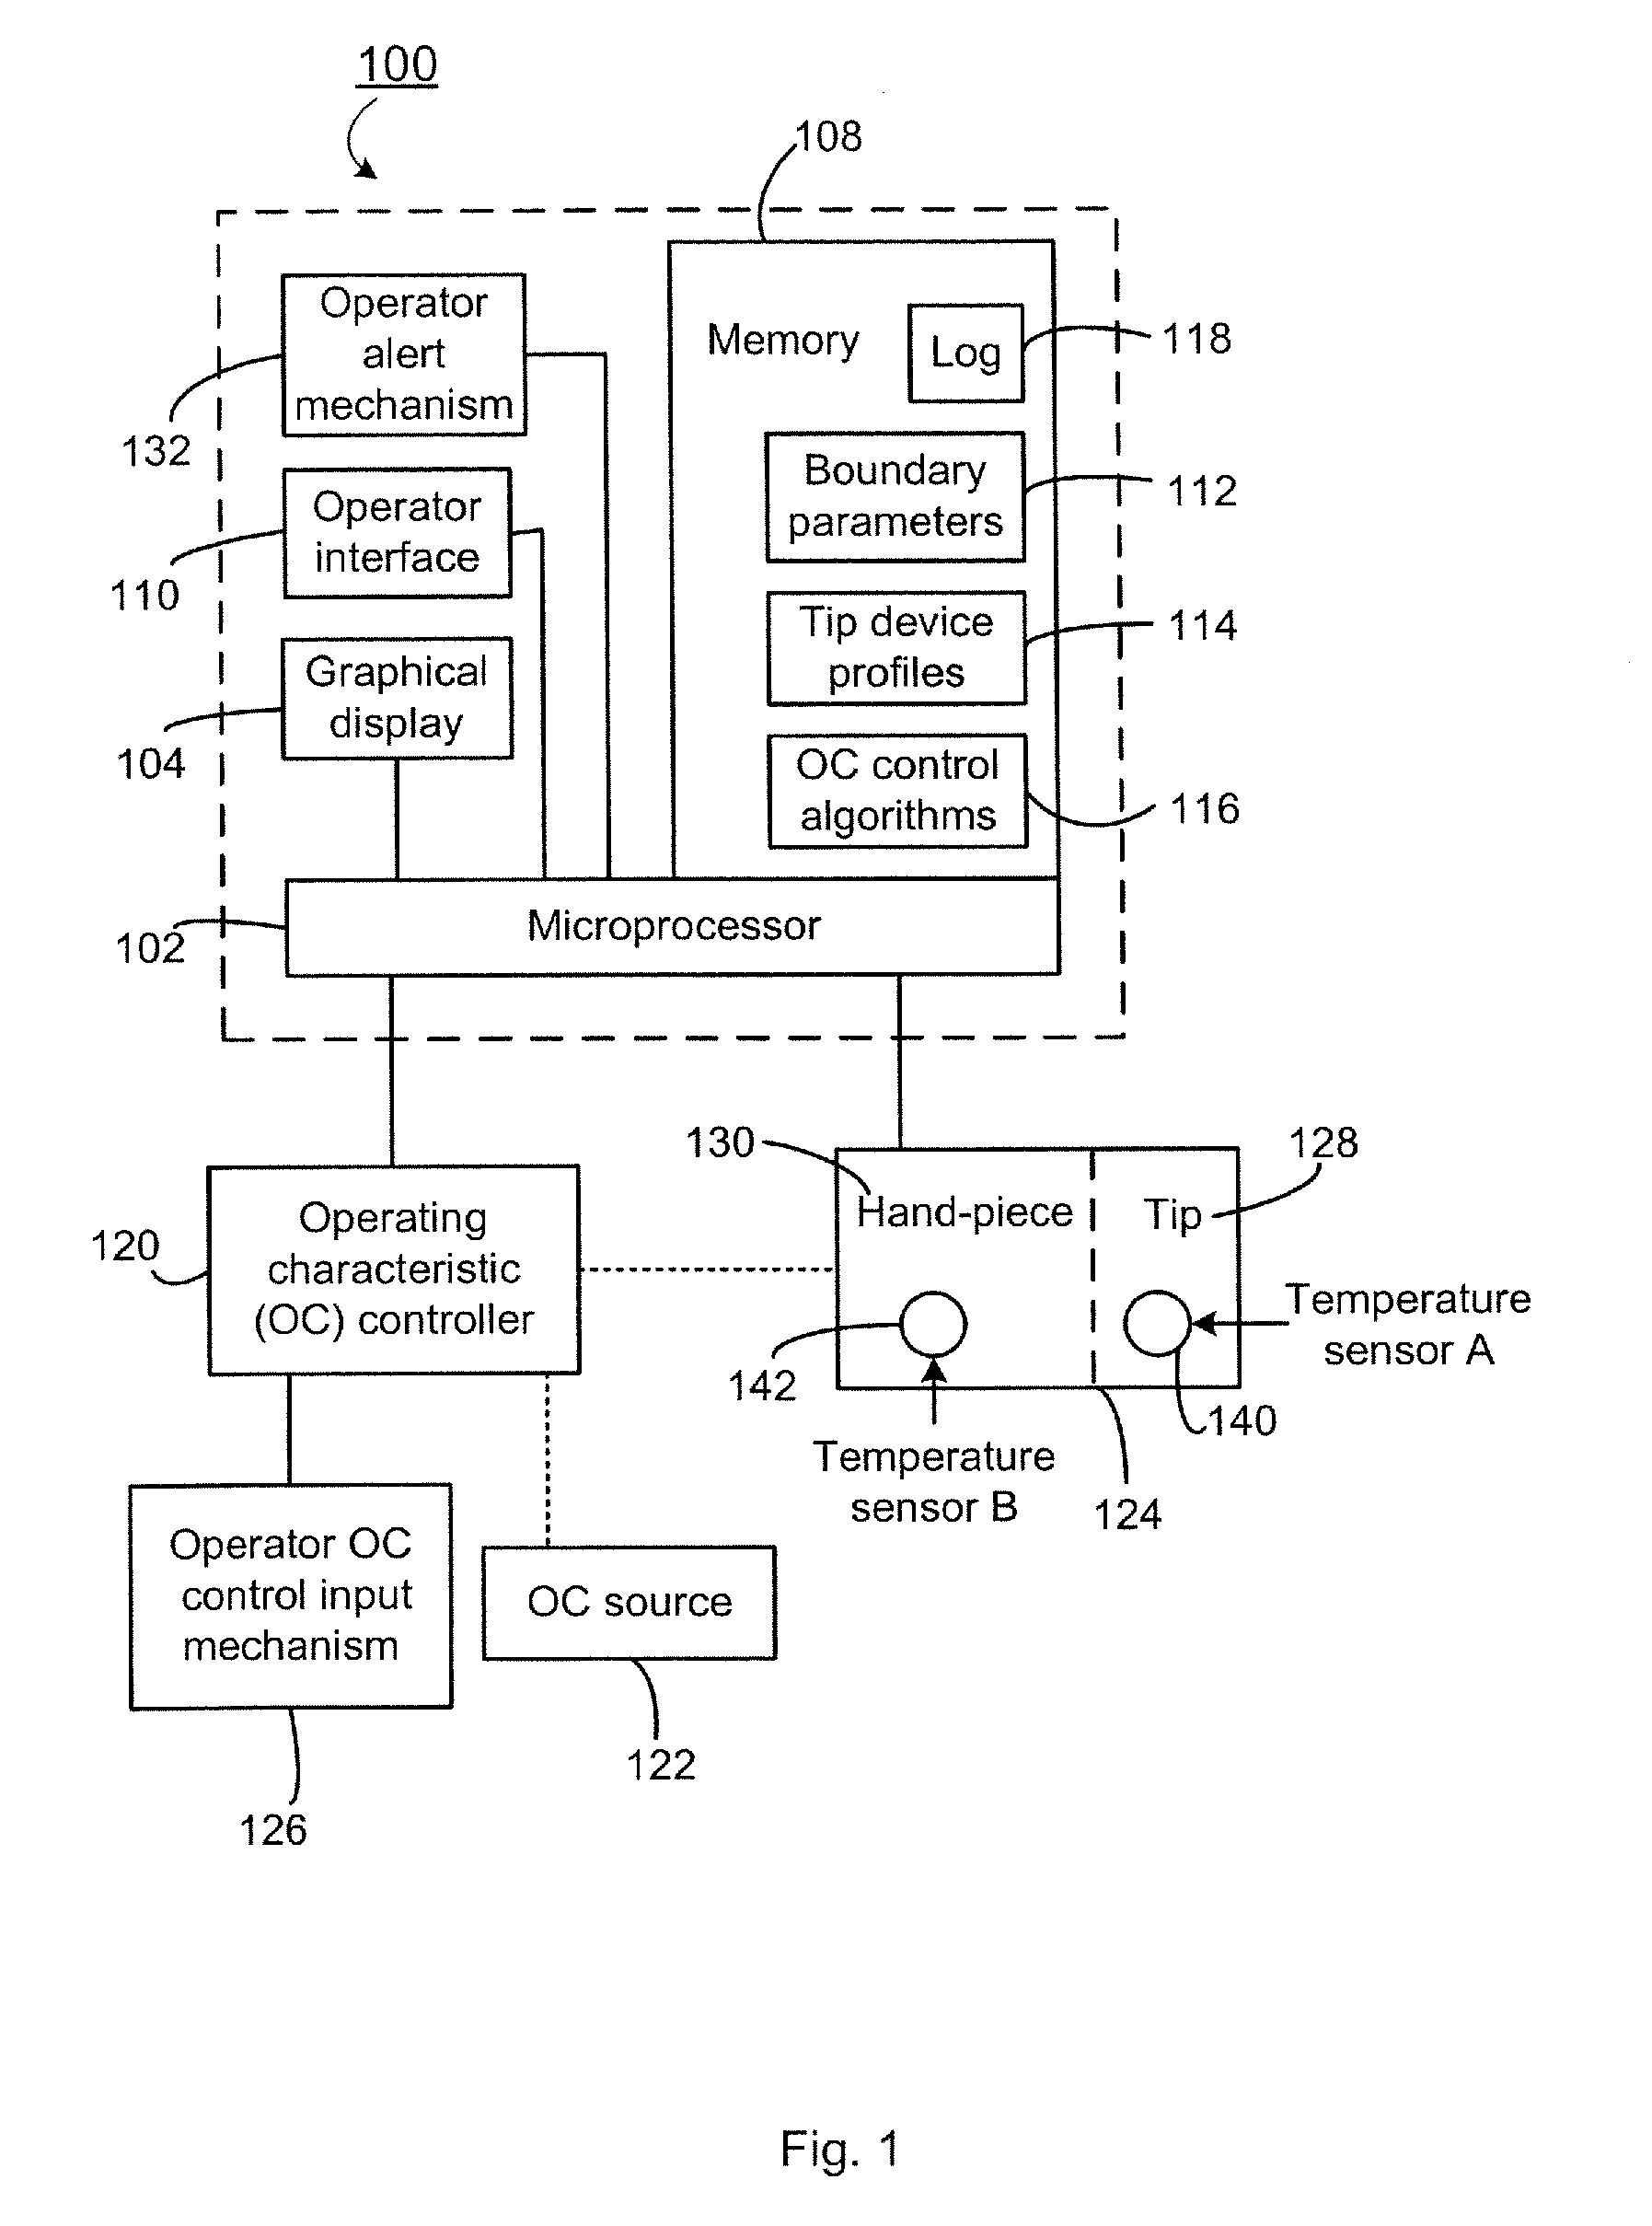 Tip-based computer controlled system for a hand-held dental delivery device